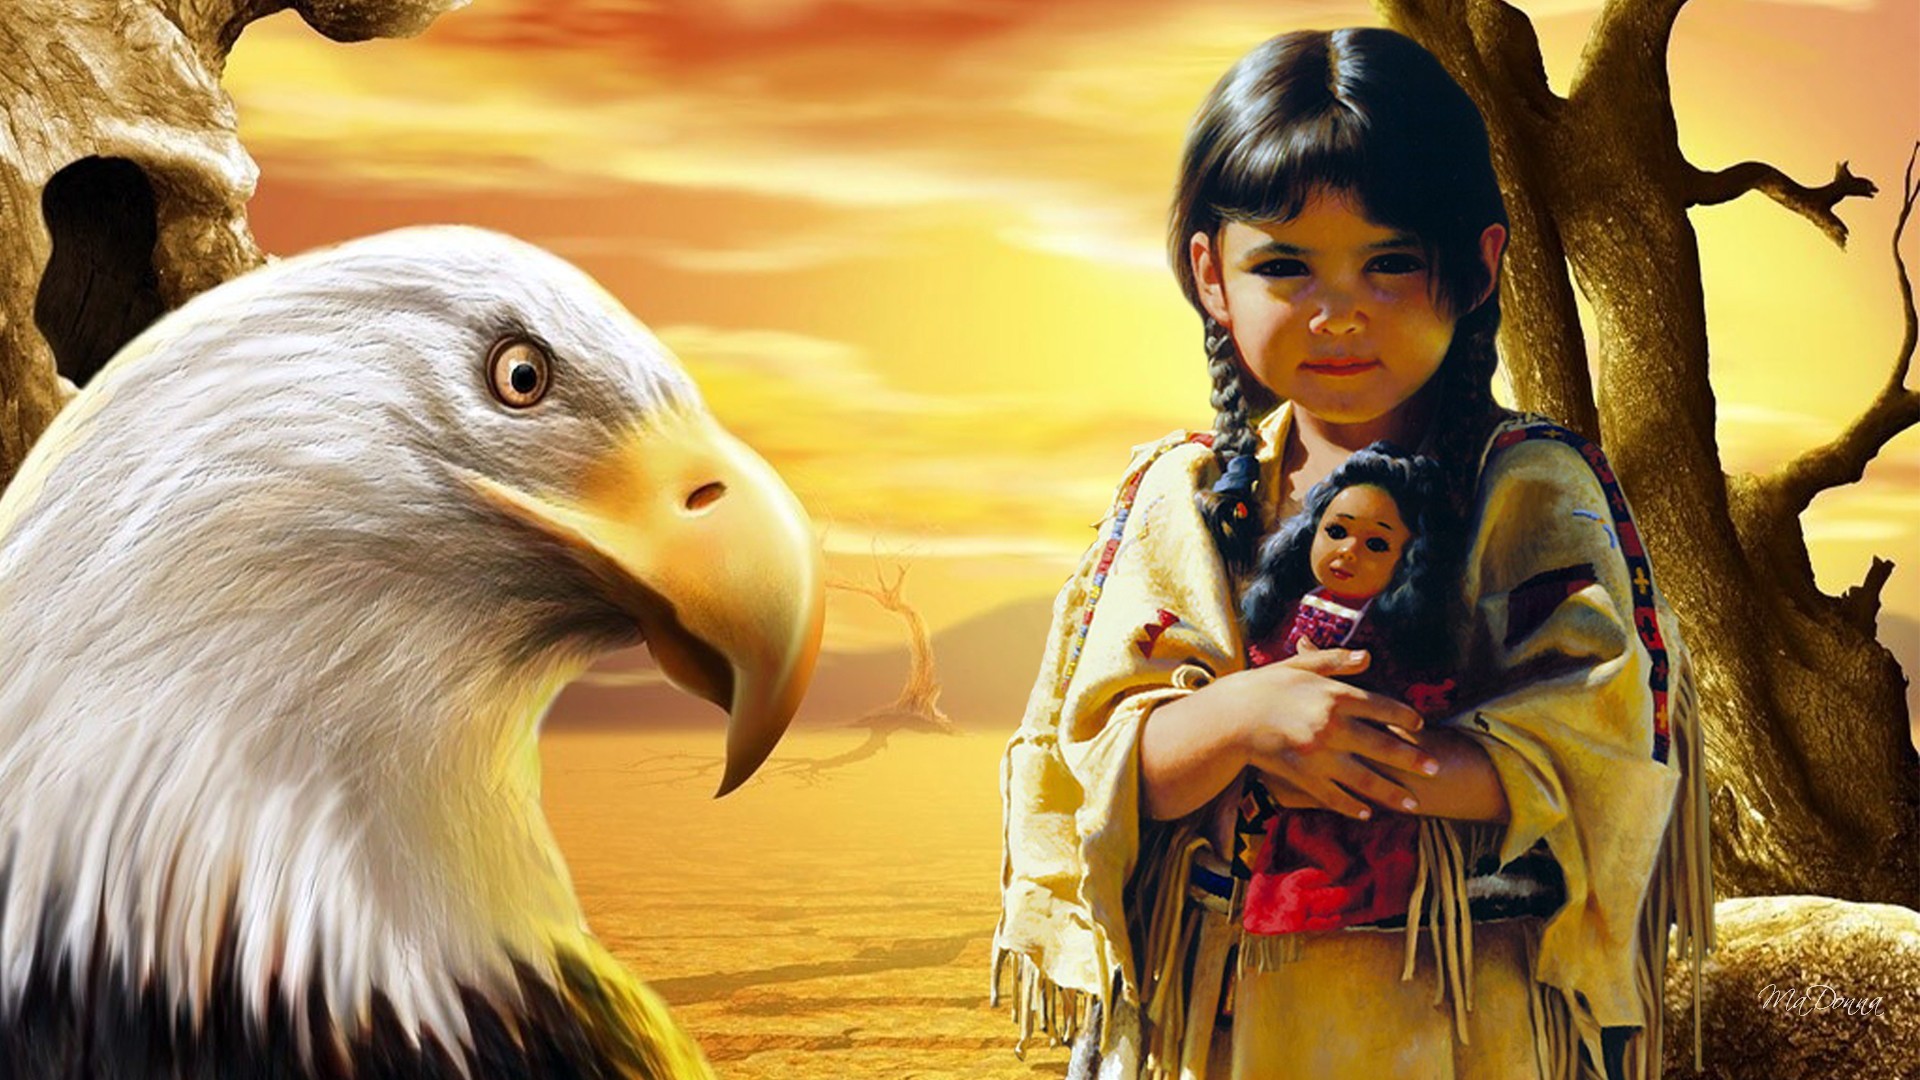 1920x1080 16 Important Facts You Should Know About Native American Heritage